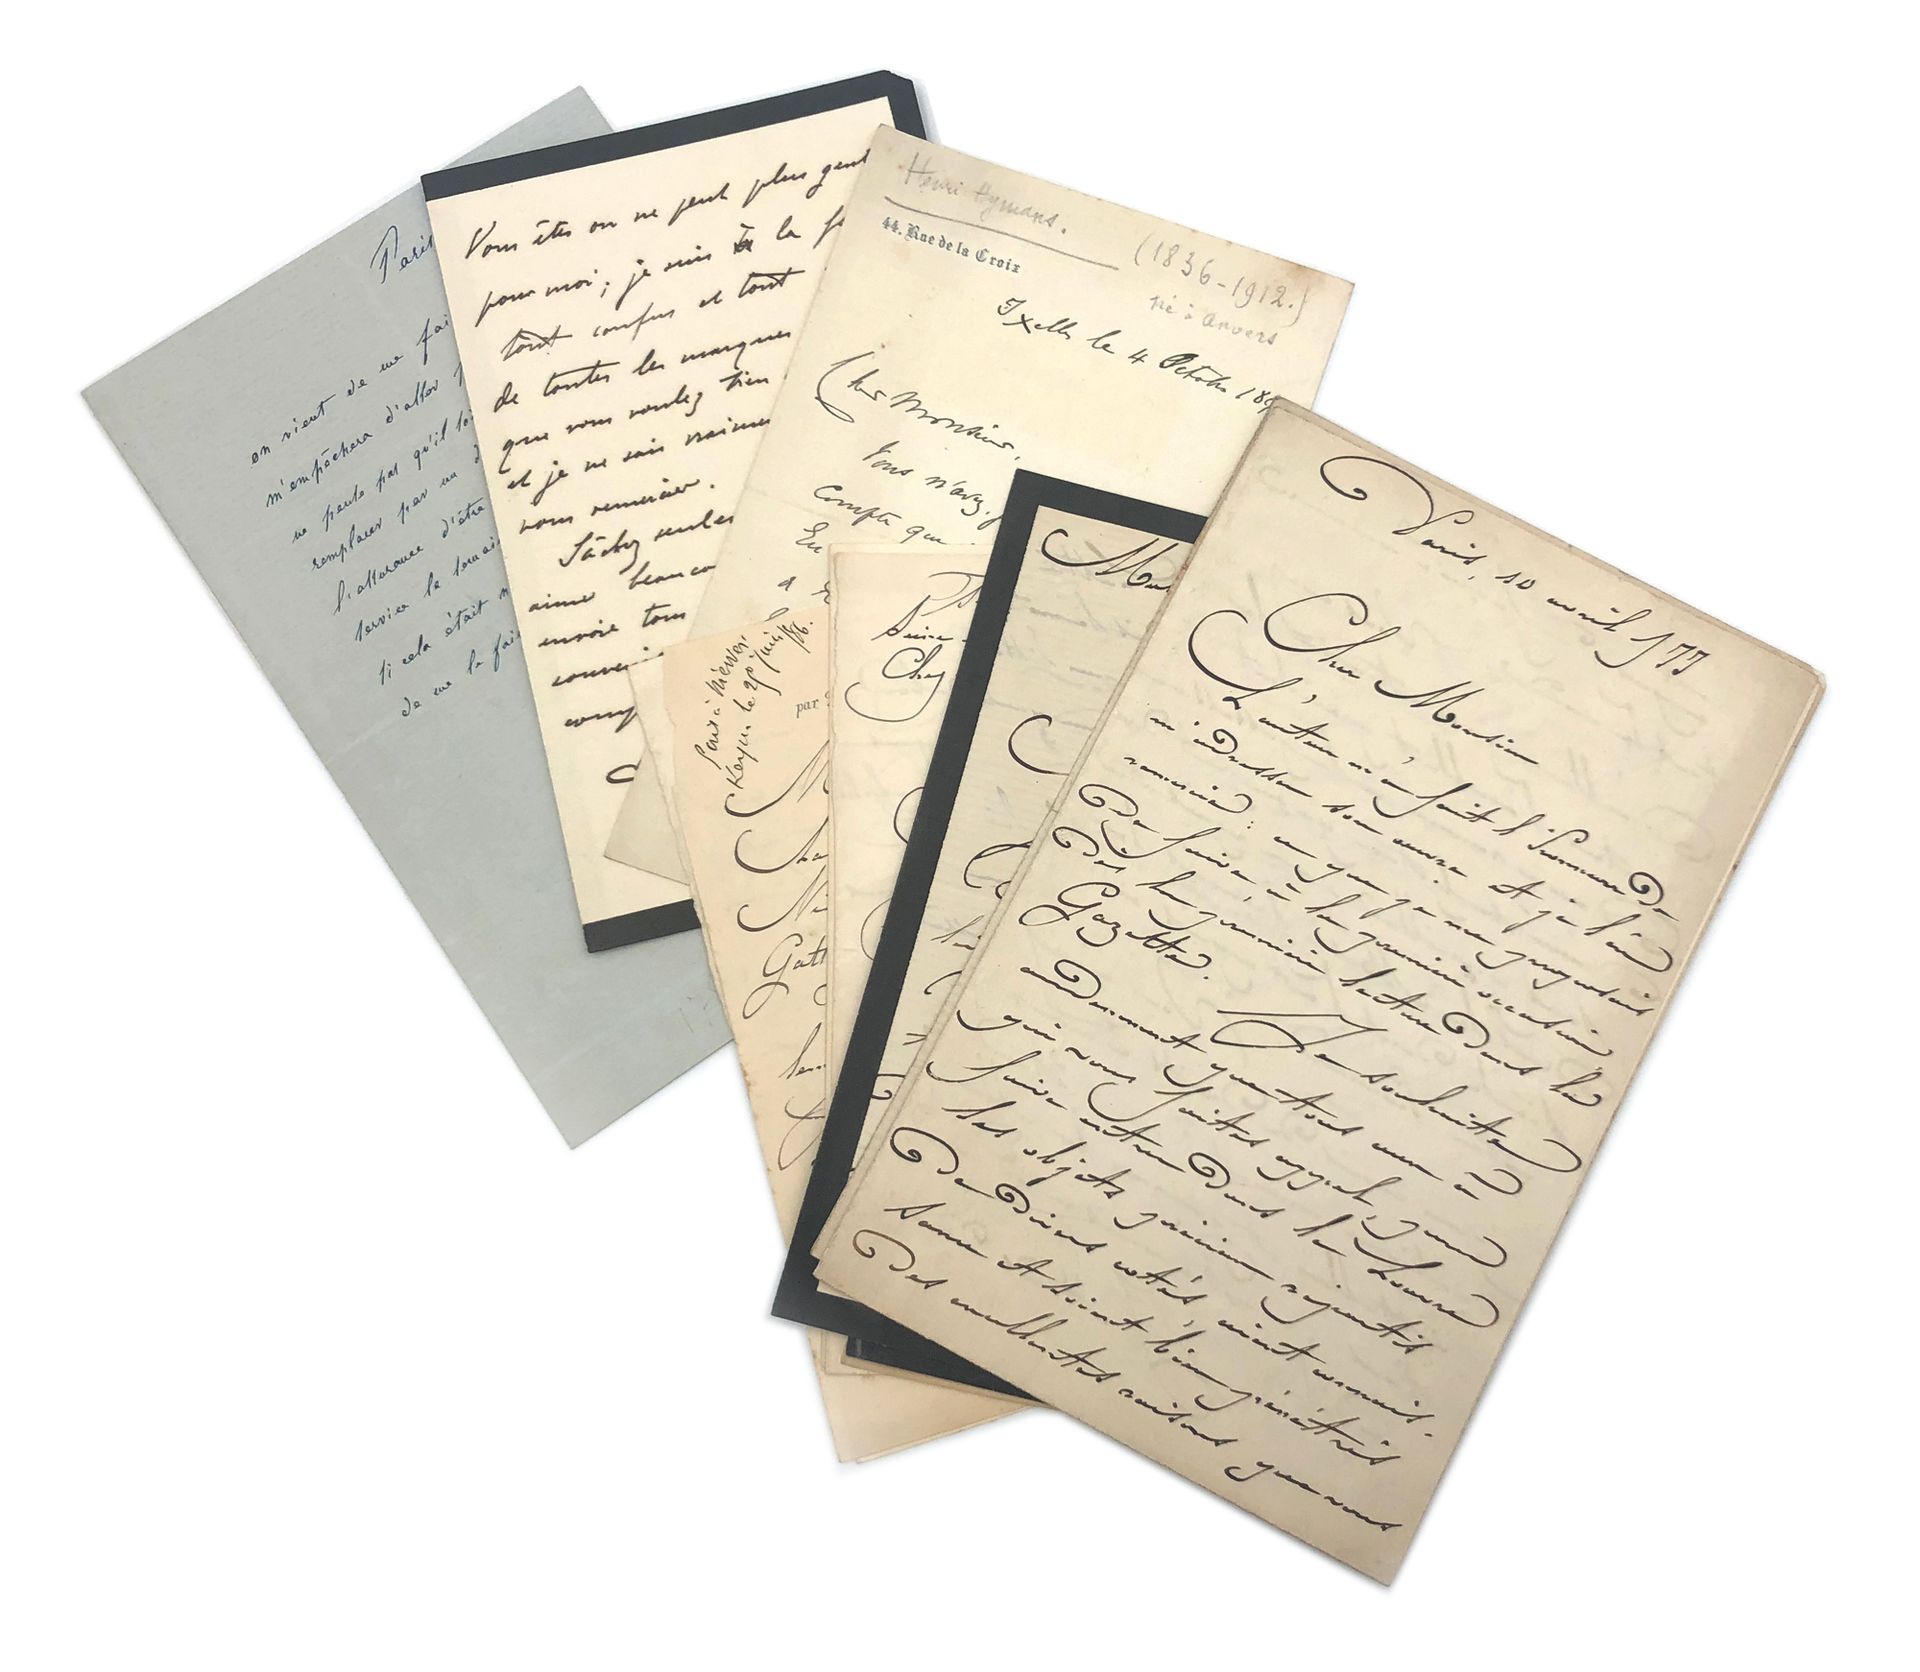 [BEAUX-ARTS - XIXe-XXe siècles]. Approximately 60 documents (mostly L.A.S.) from&hellip;